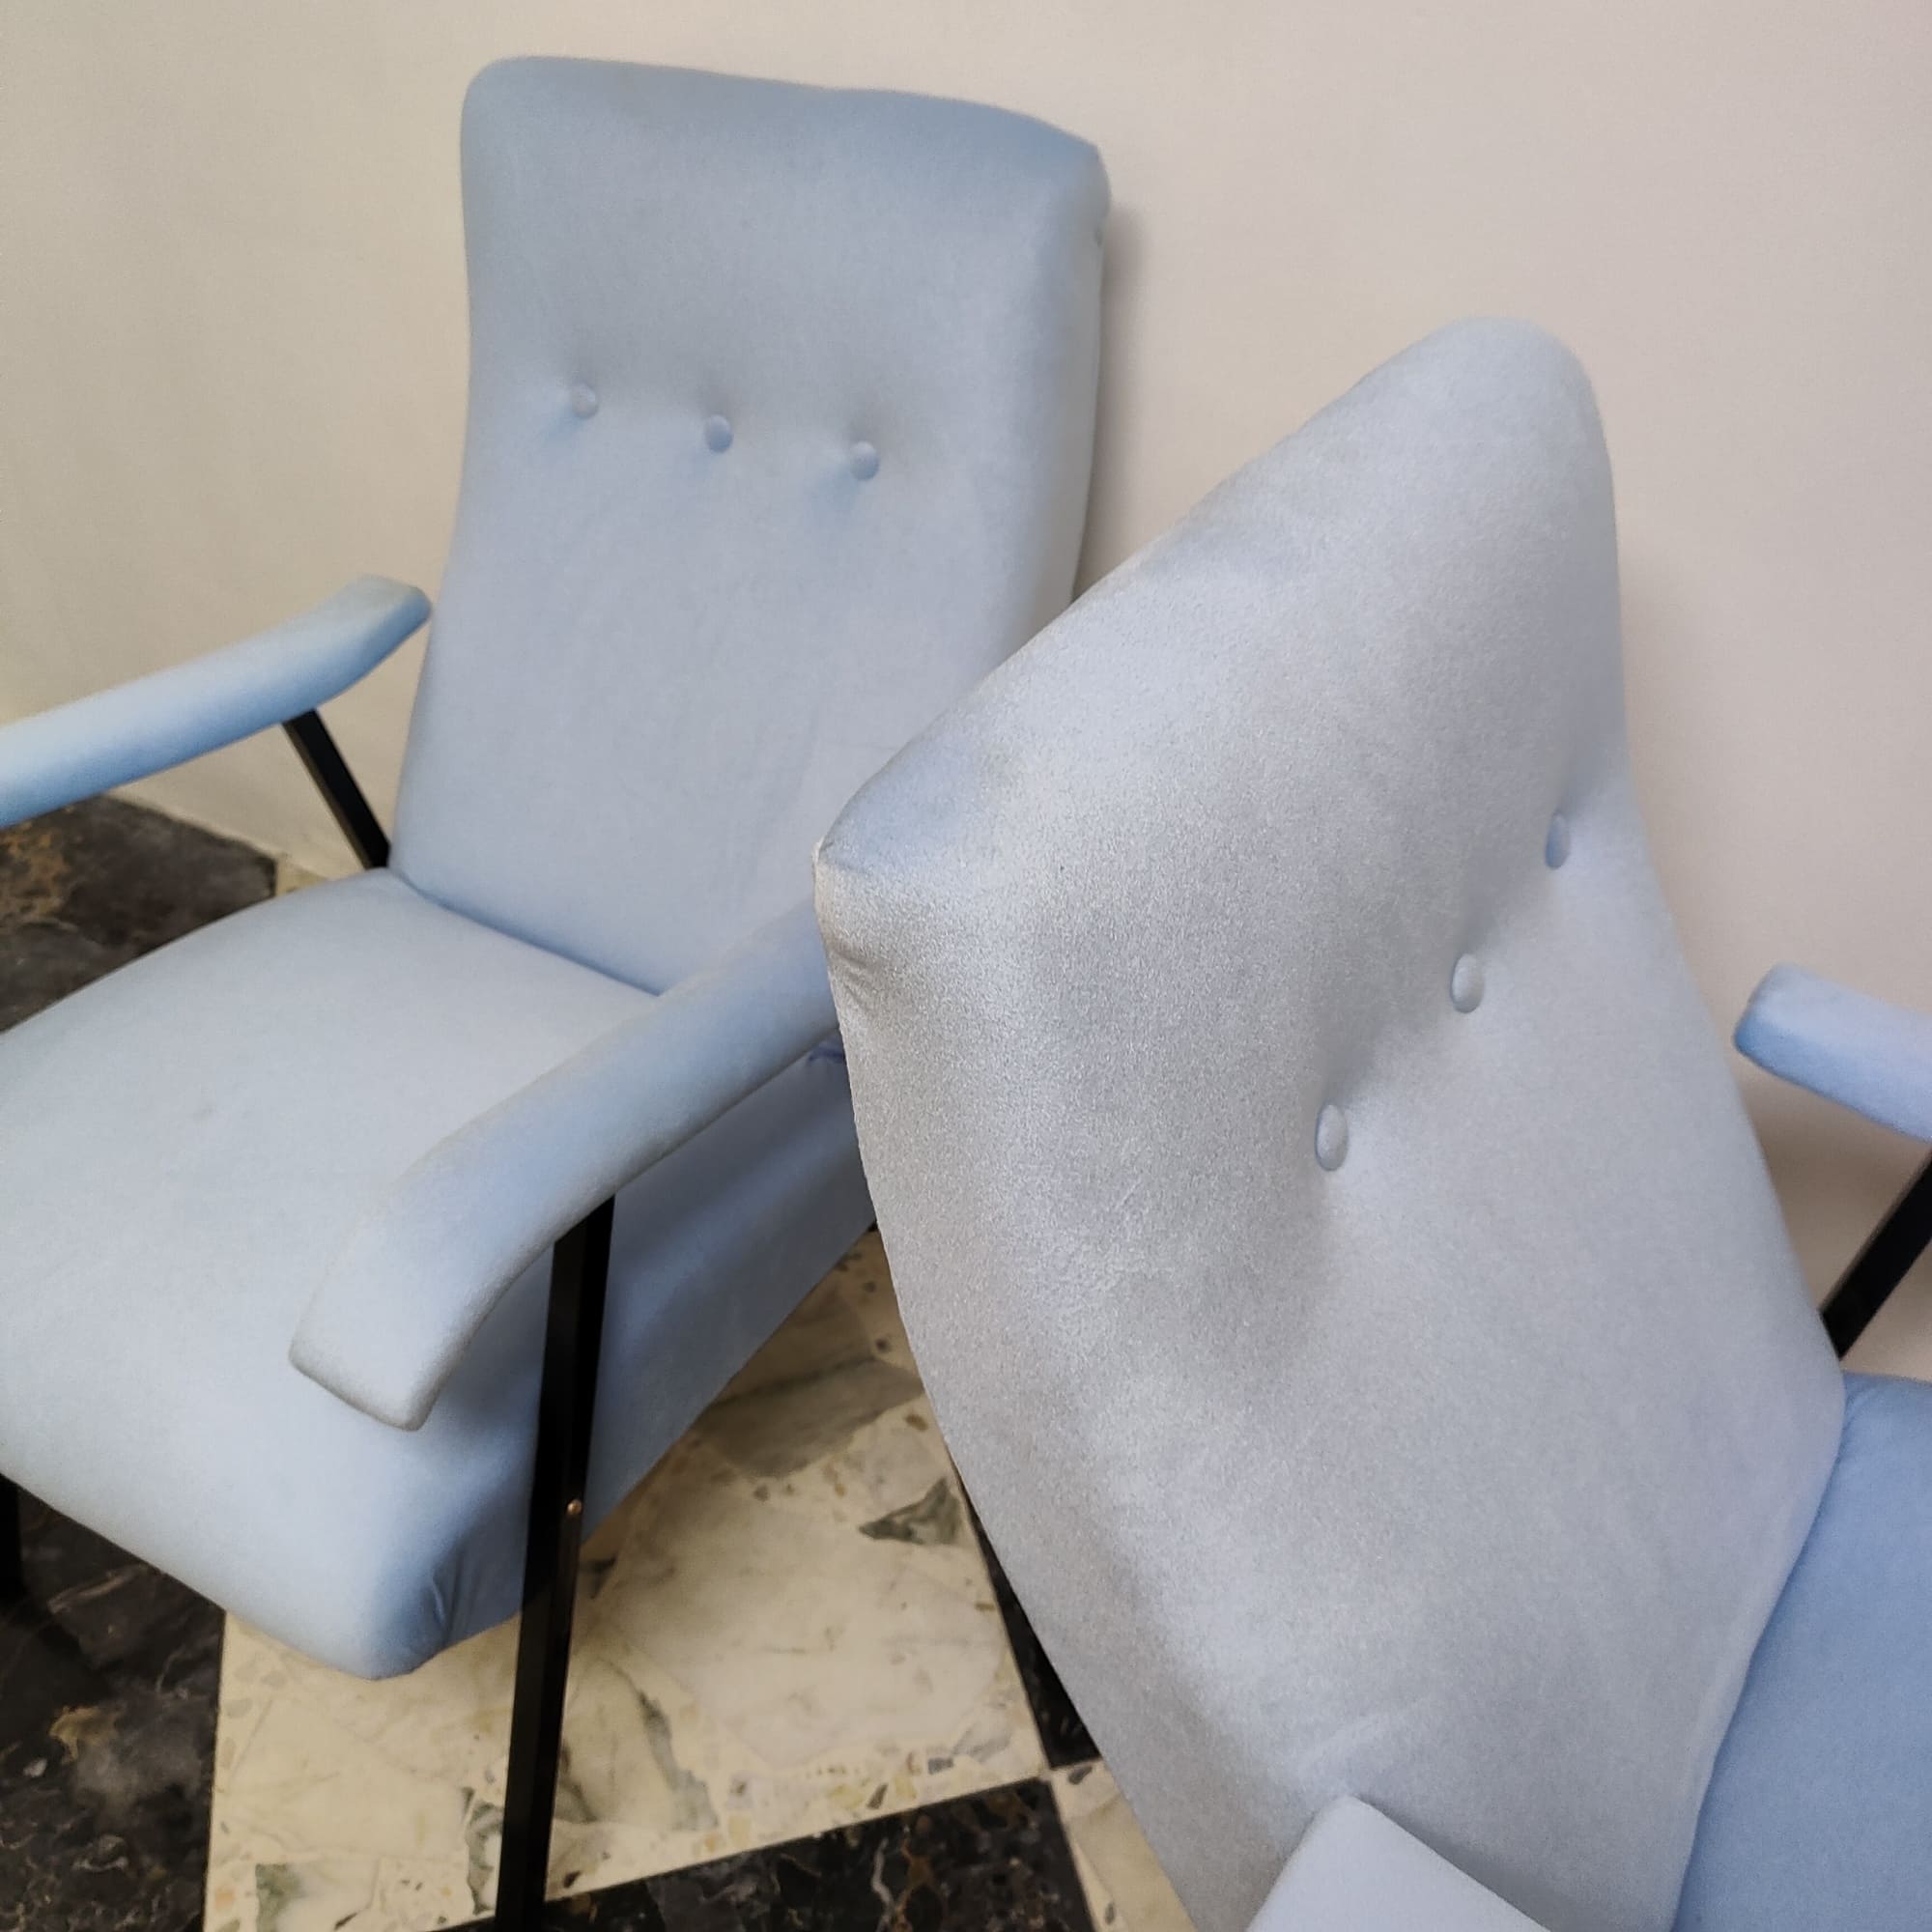 visionidepoca-pair-of-60s-70s-armchairs-upholstered-in blue-and-black-feet-with-brass-inserts-2